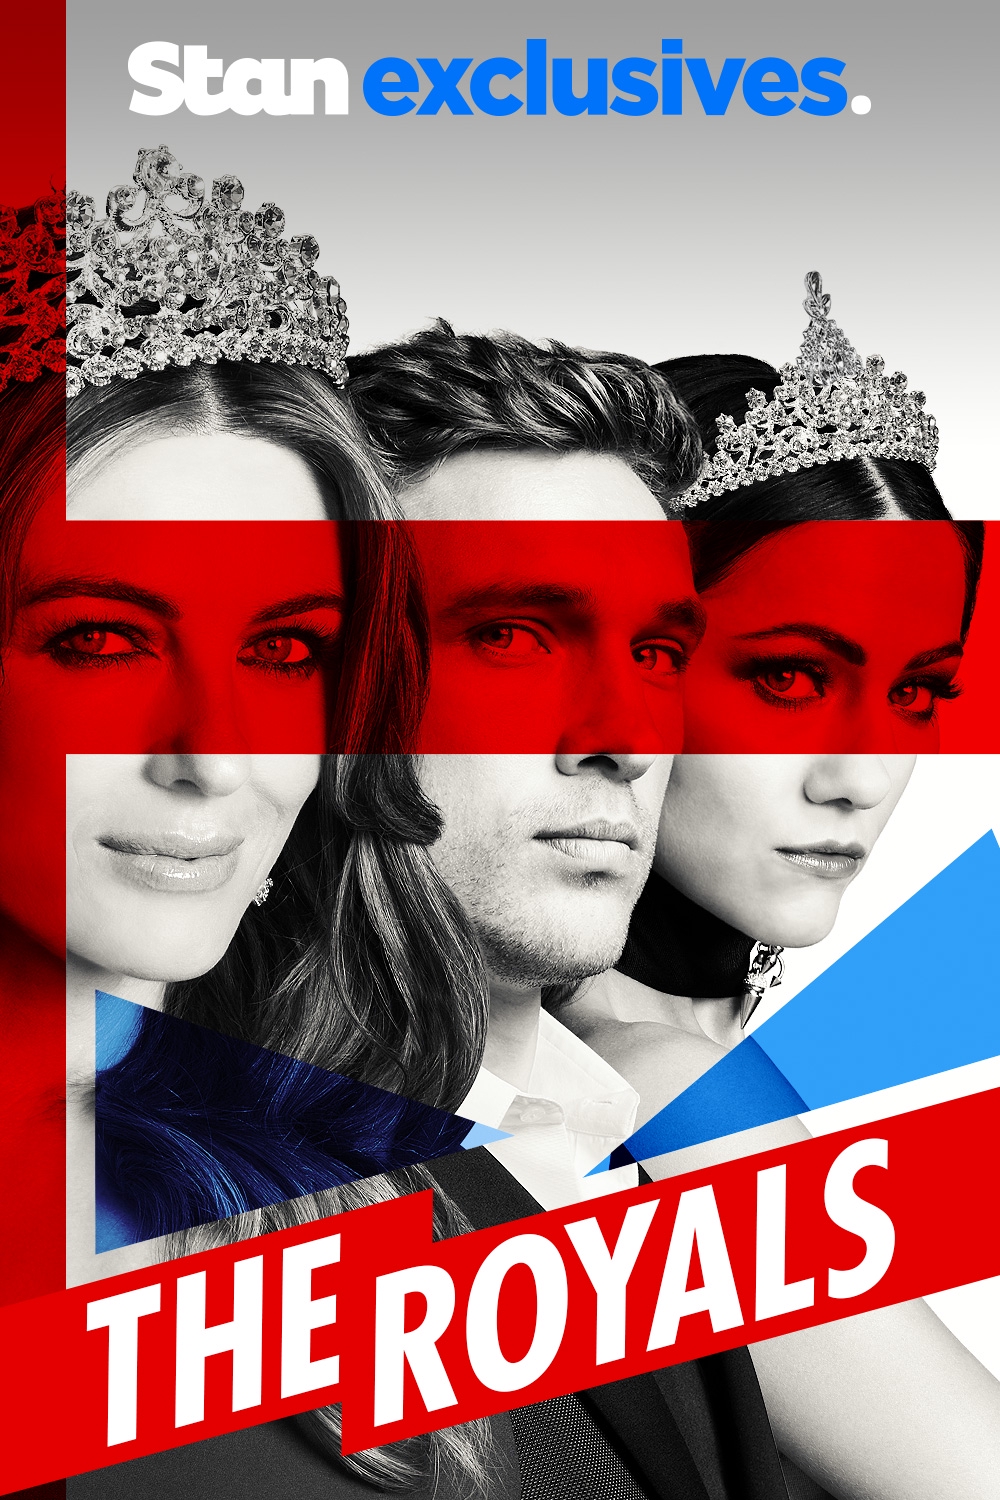 Watch The Royals Online Stream Seasons 1 4 Now Stan